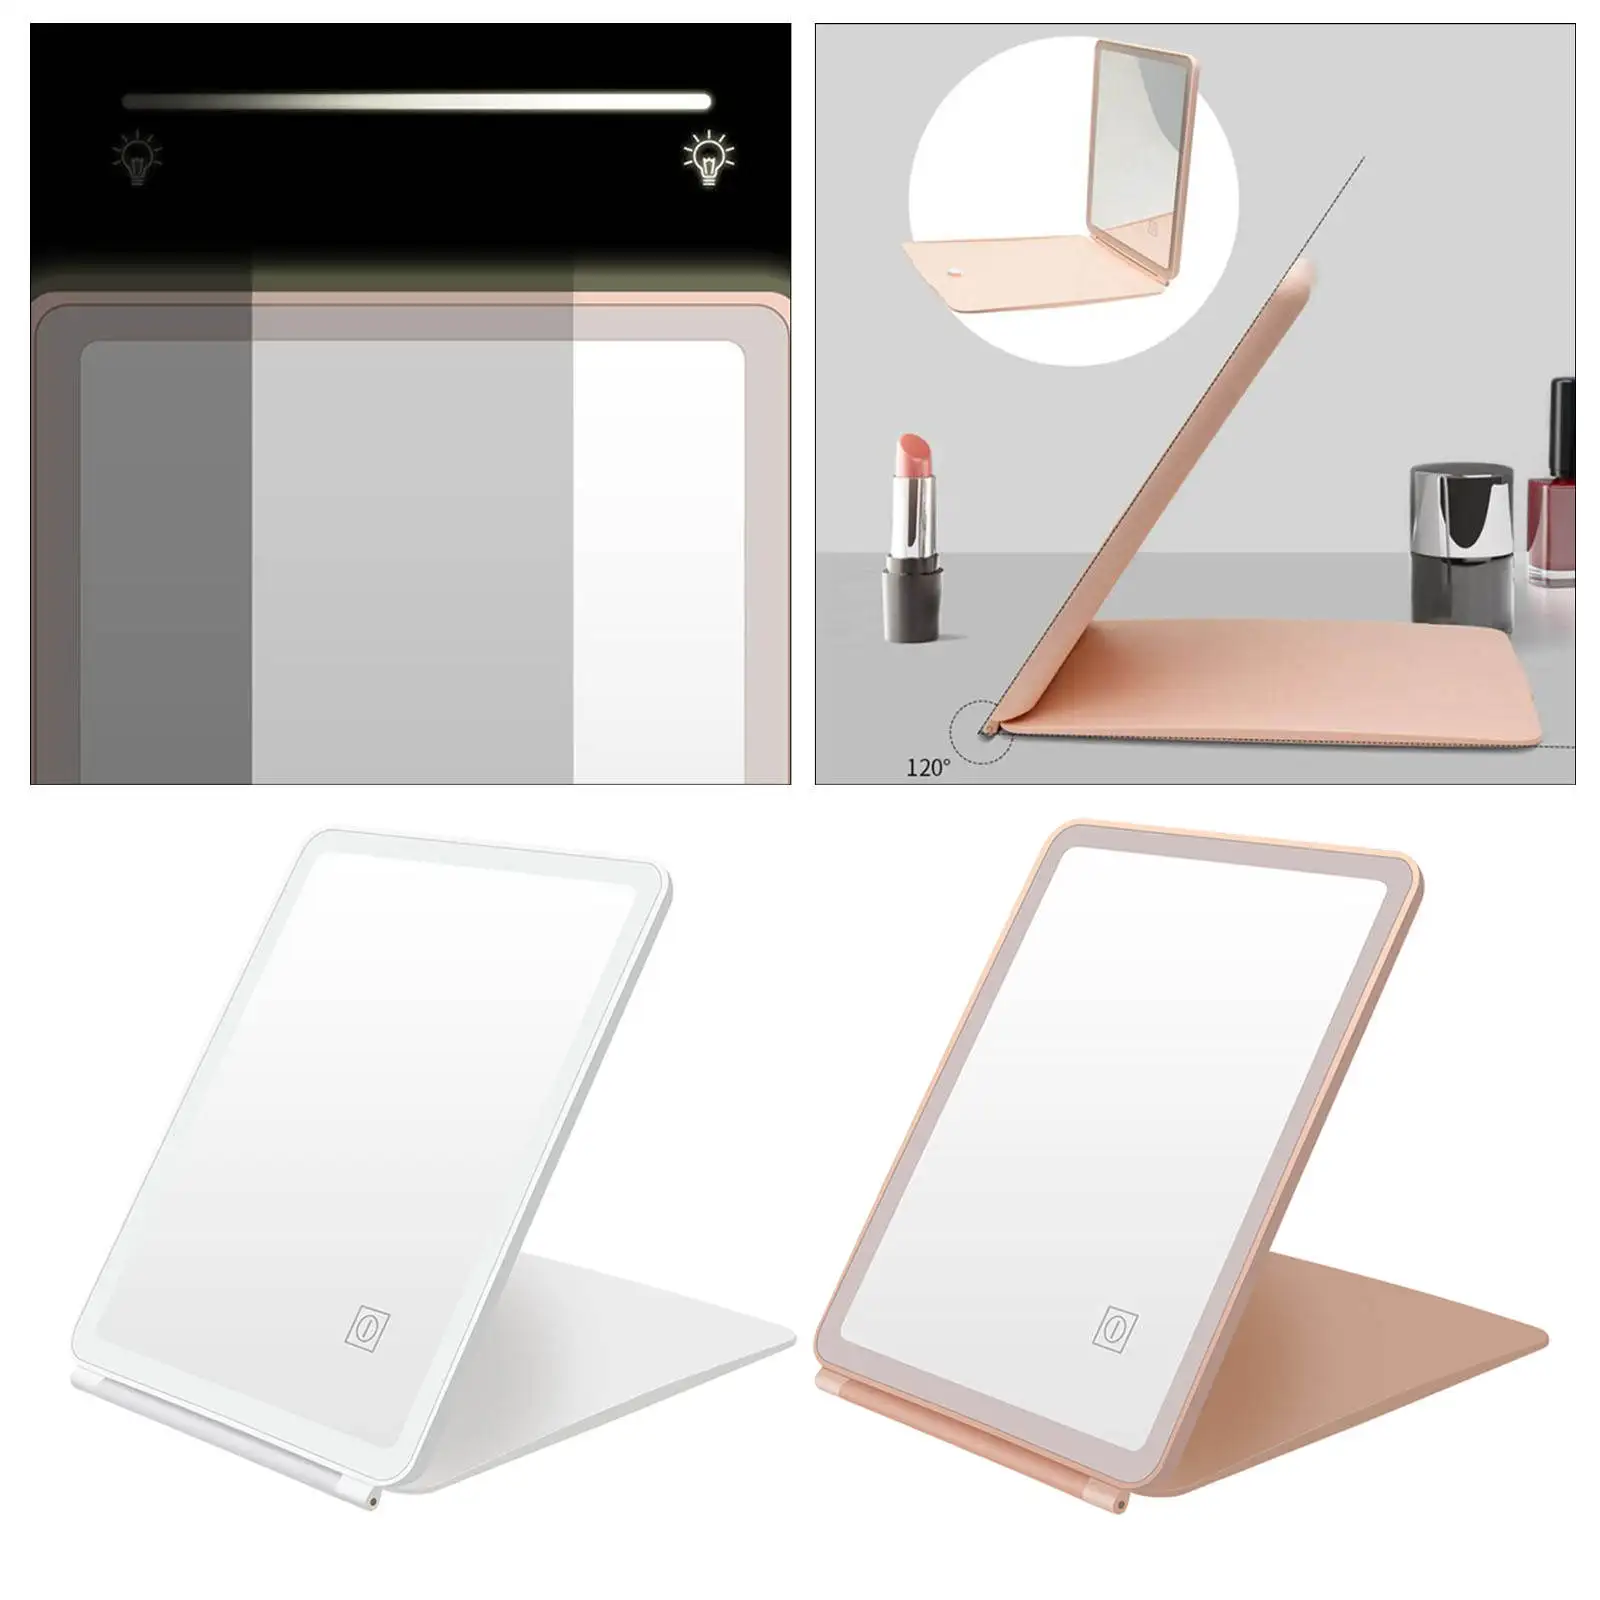 Flip LED Makeup Mirror USB Rechargeable Dimmable Touch Switch 120 Adjustable Compact HD Lighted Makeup Vanity Mirror for Travel